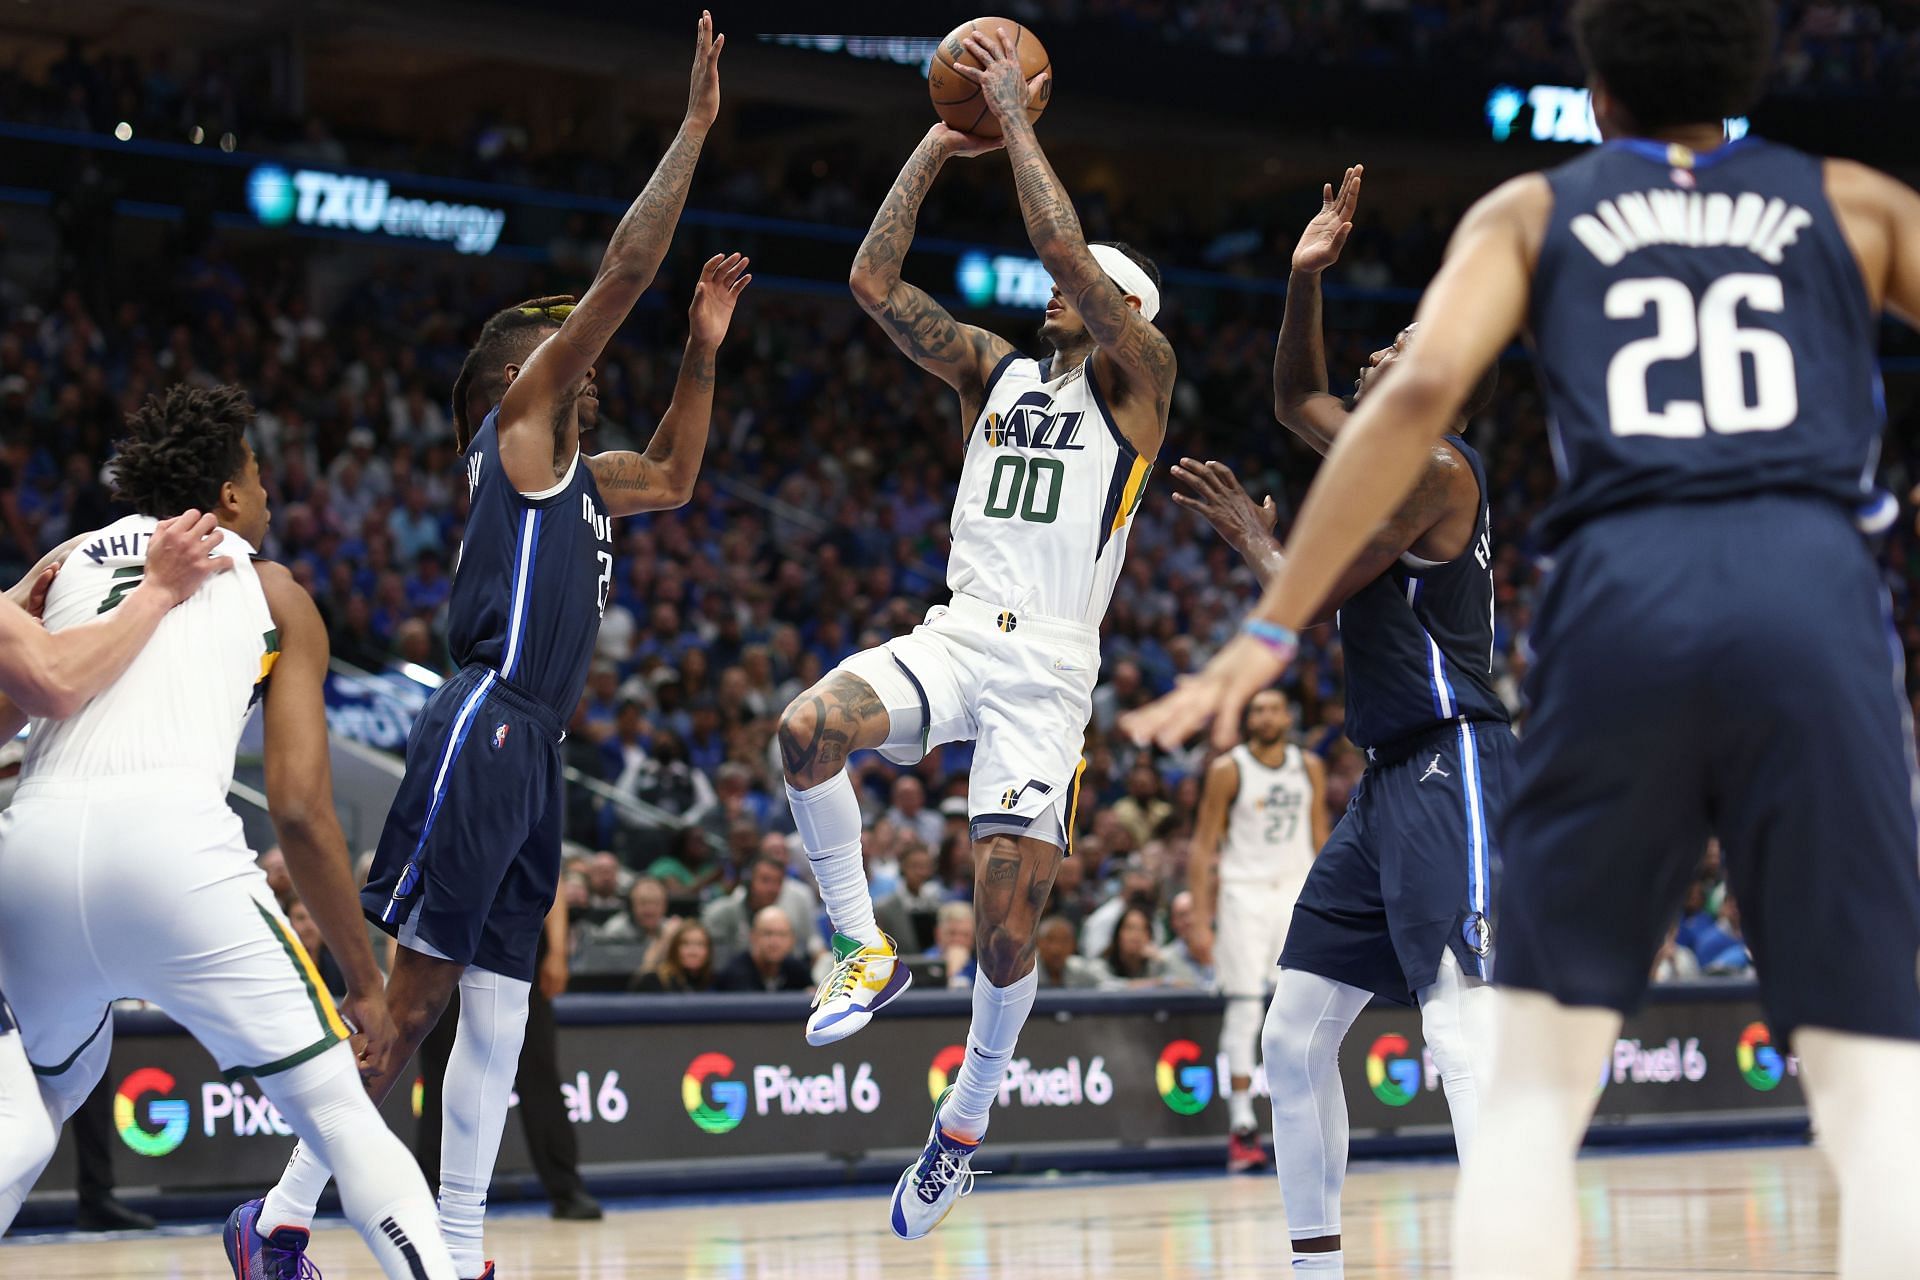 The Utah Jazz will host the Dallas Mavericks for Game 6 on April 28th